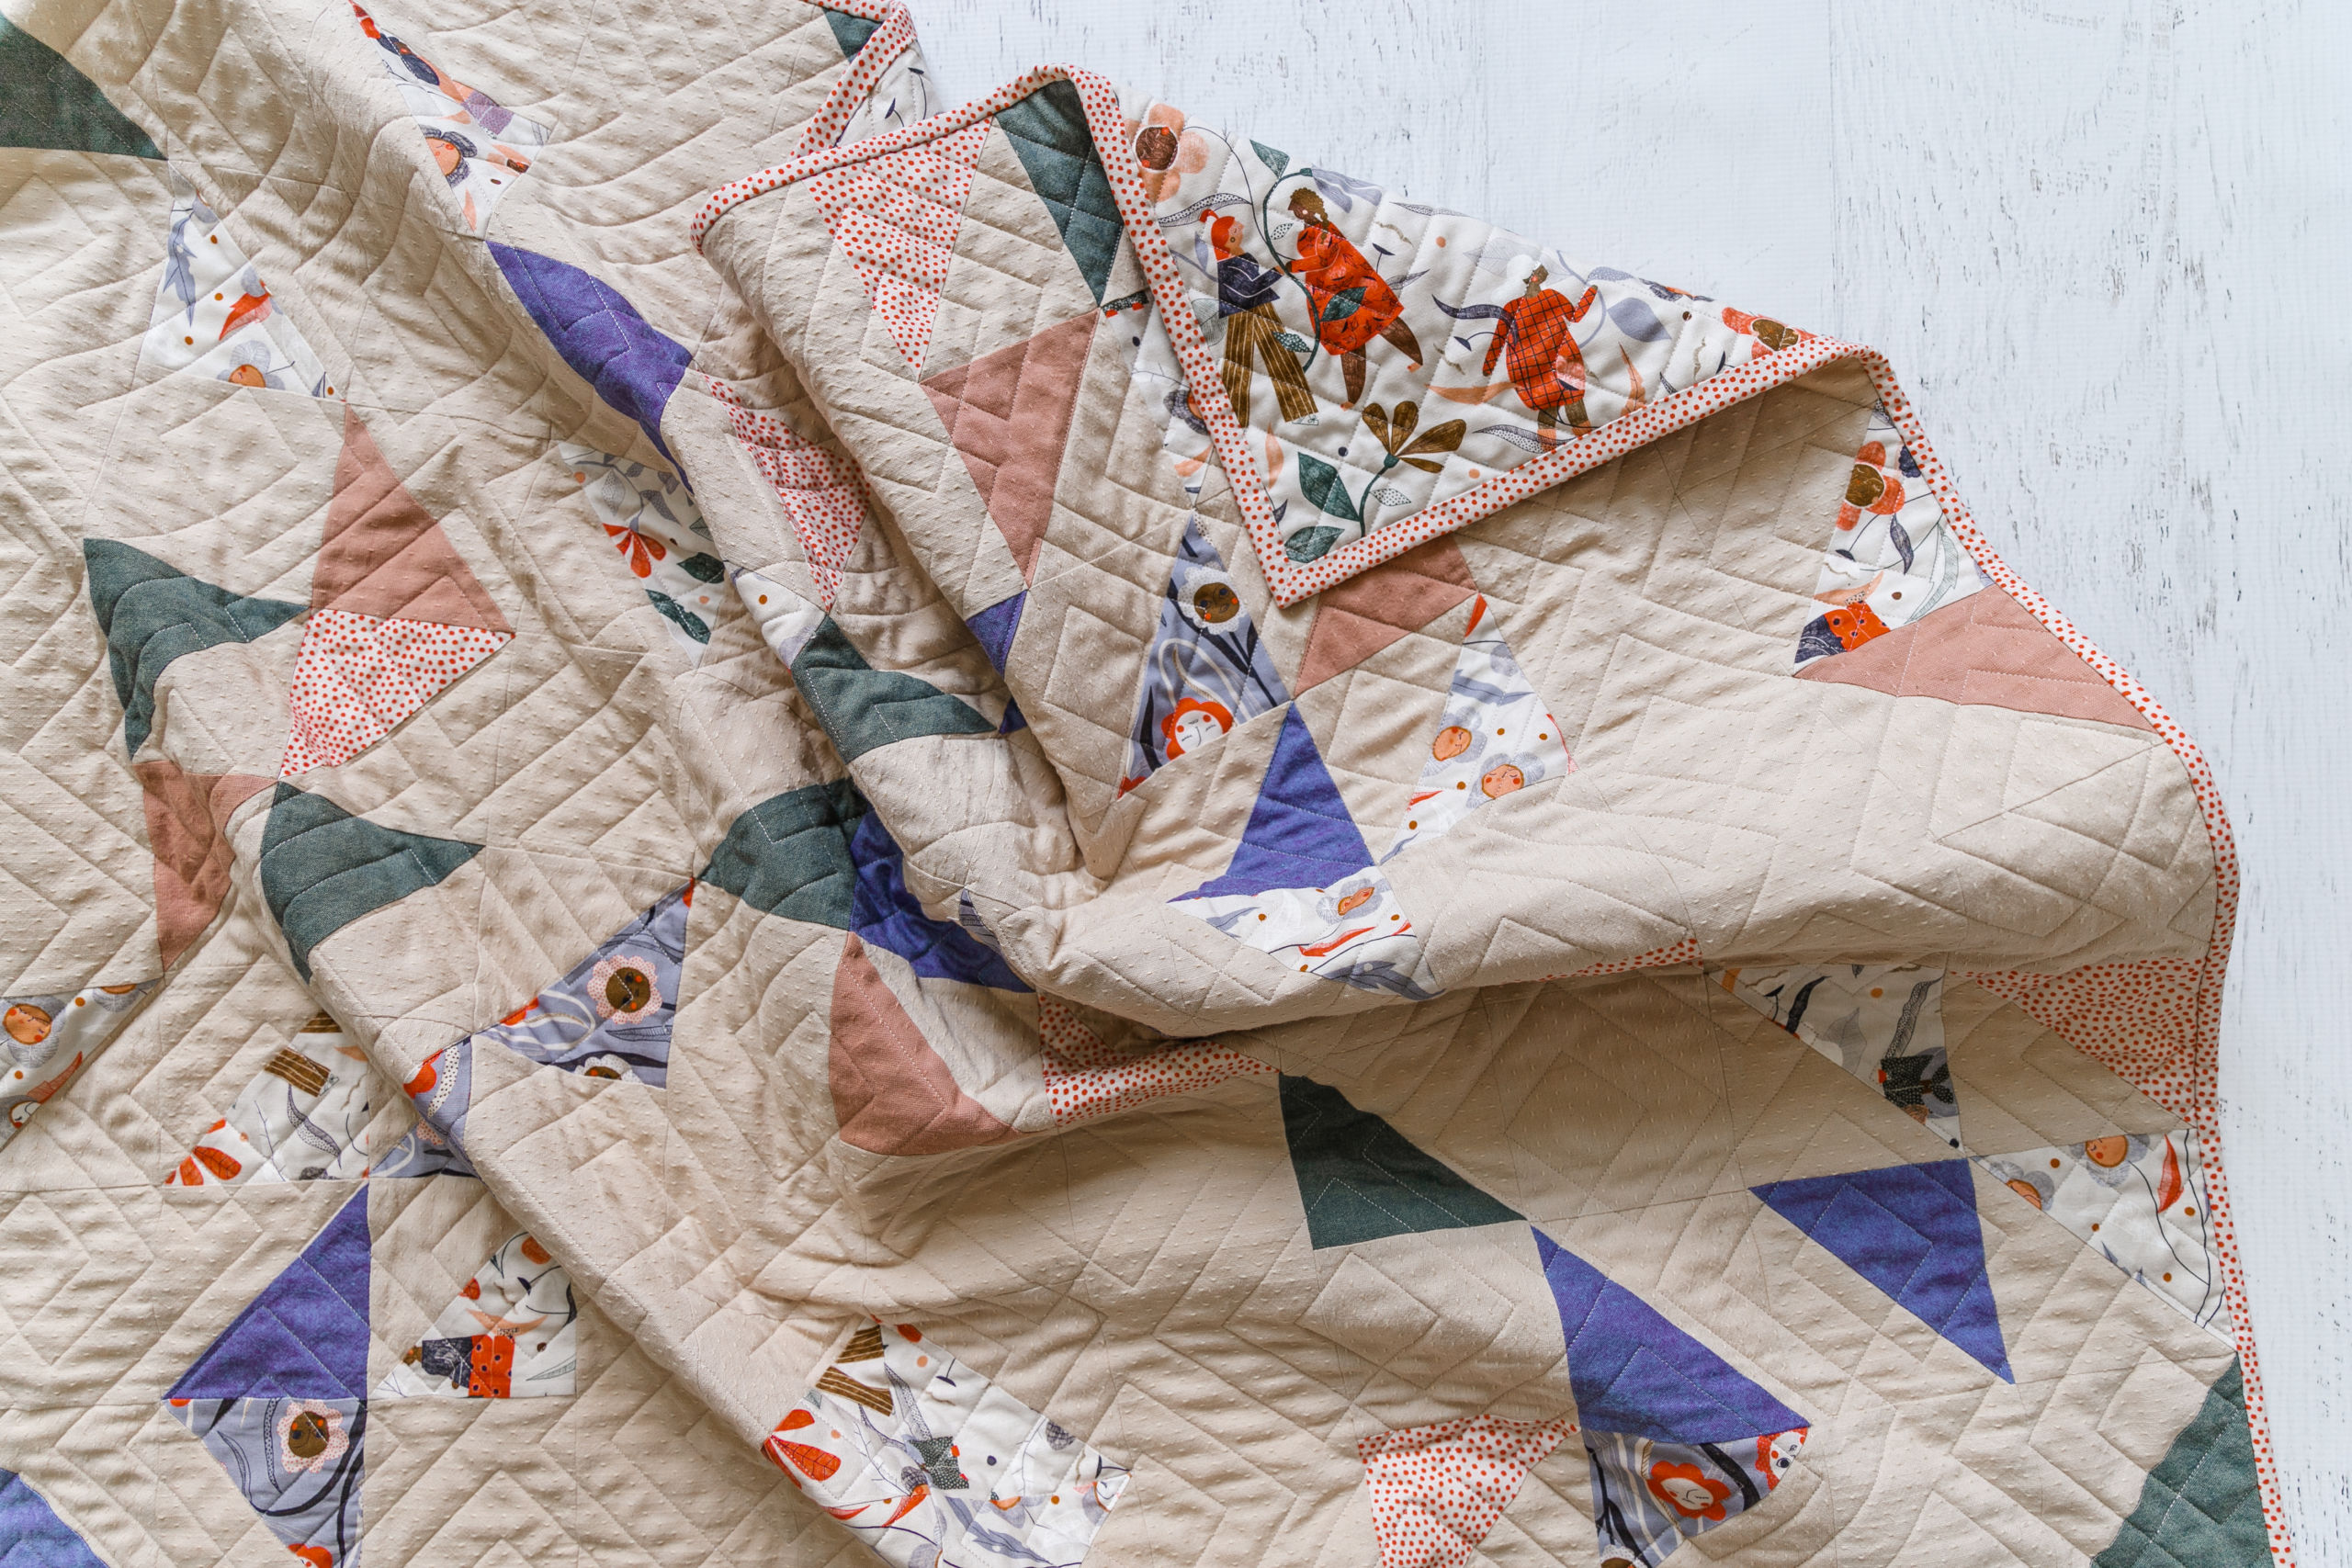 Learn our best tips and tricks for making the Summer Haze quilt pattern in our three part blog series! suzyquilts.com #sewingdiy #quilting